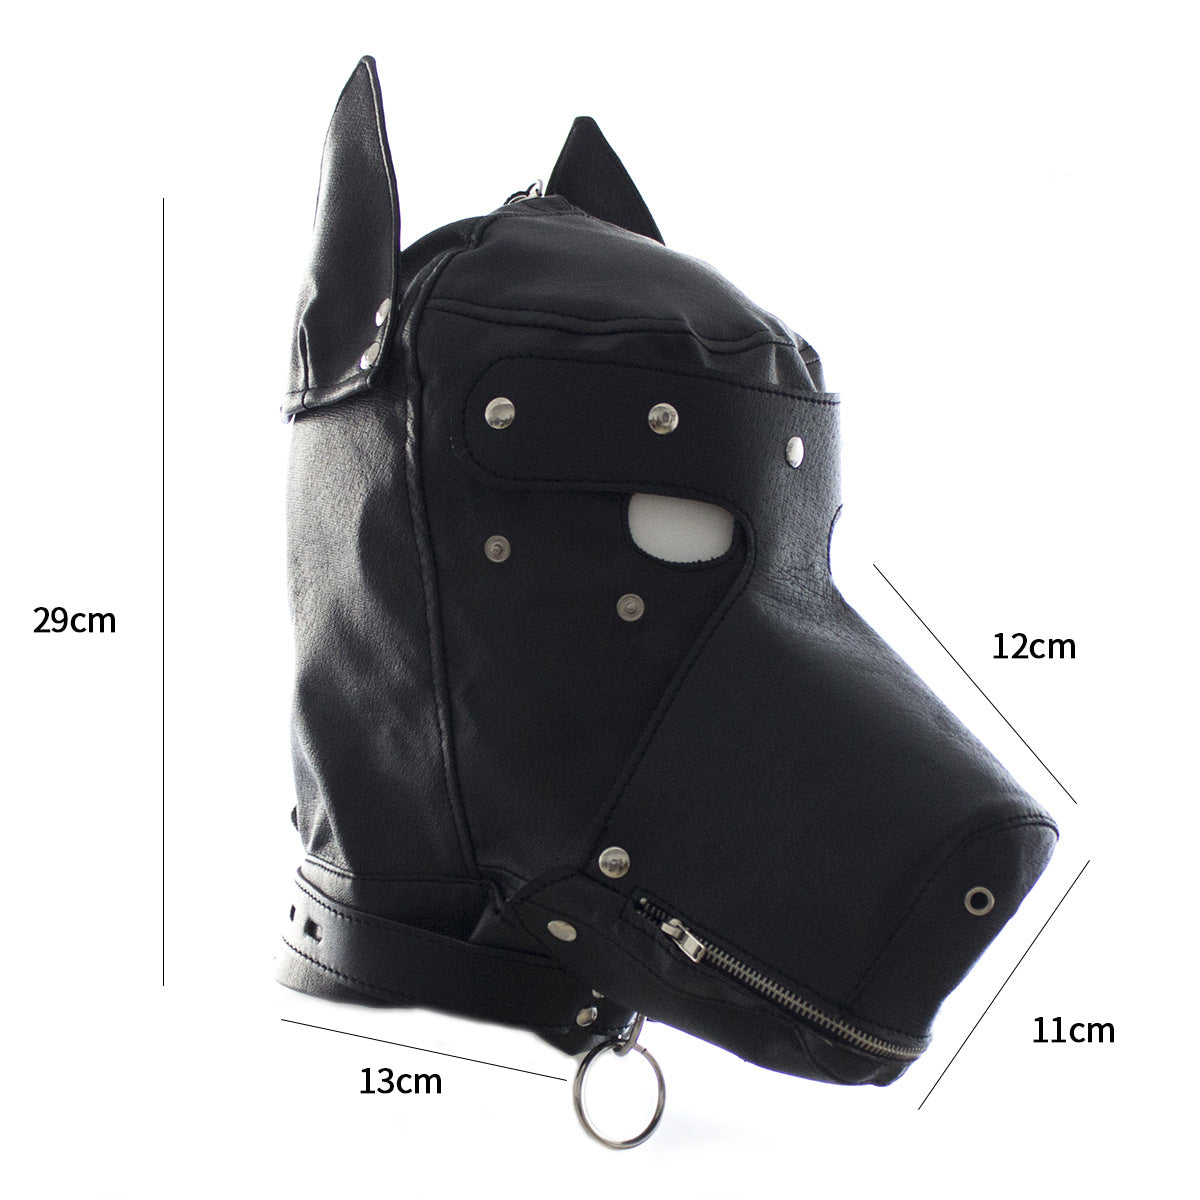 Vegan Leather Dog Mask w/ Removable Eye & Mouth Pieces